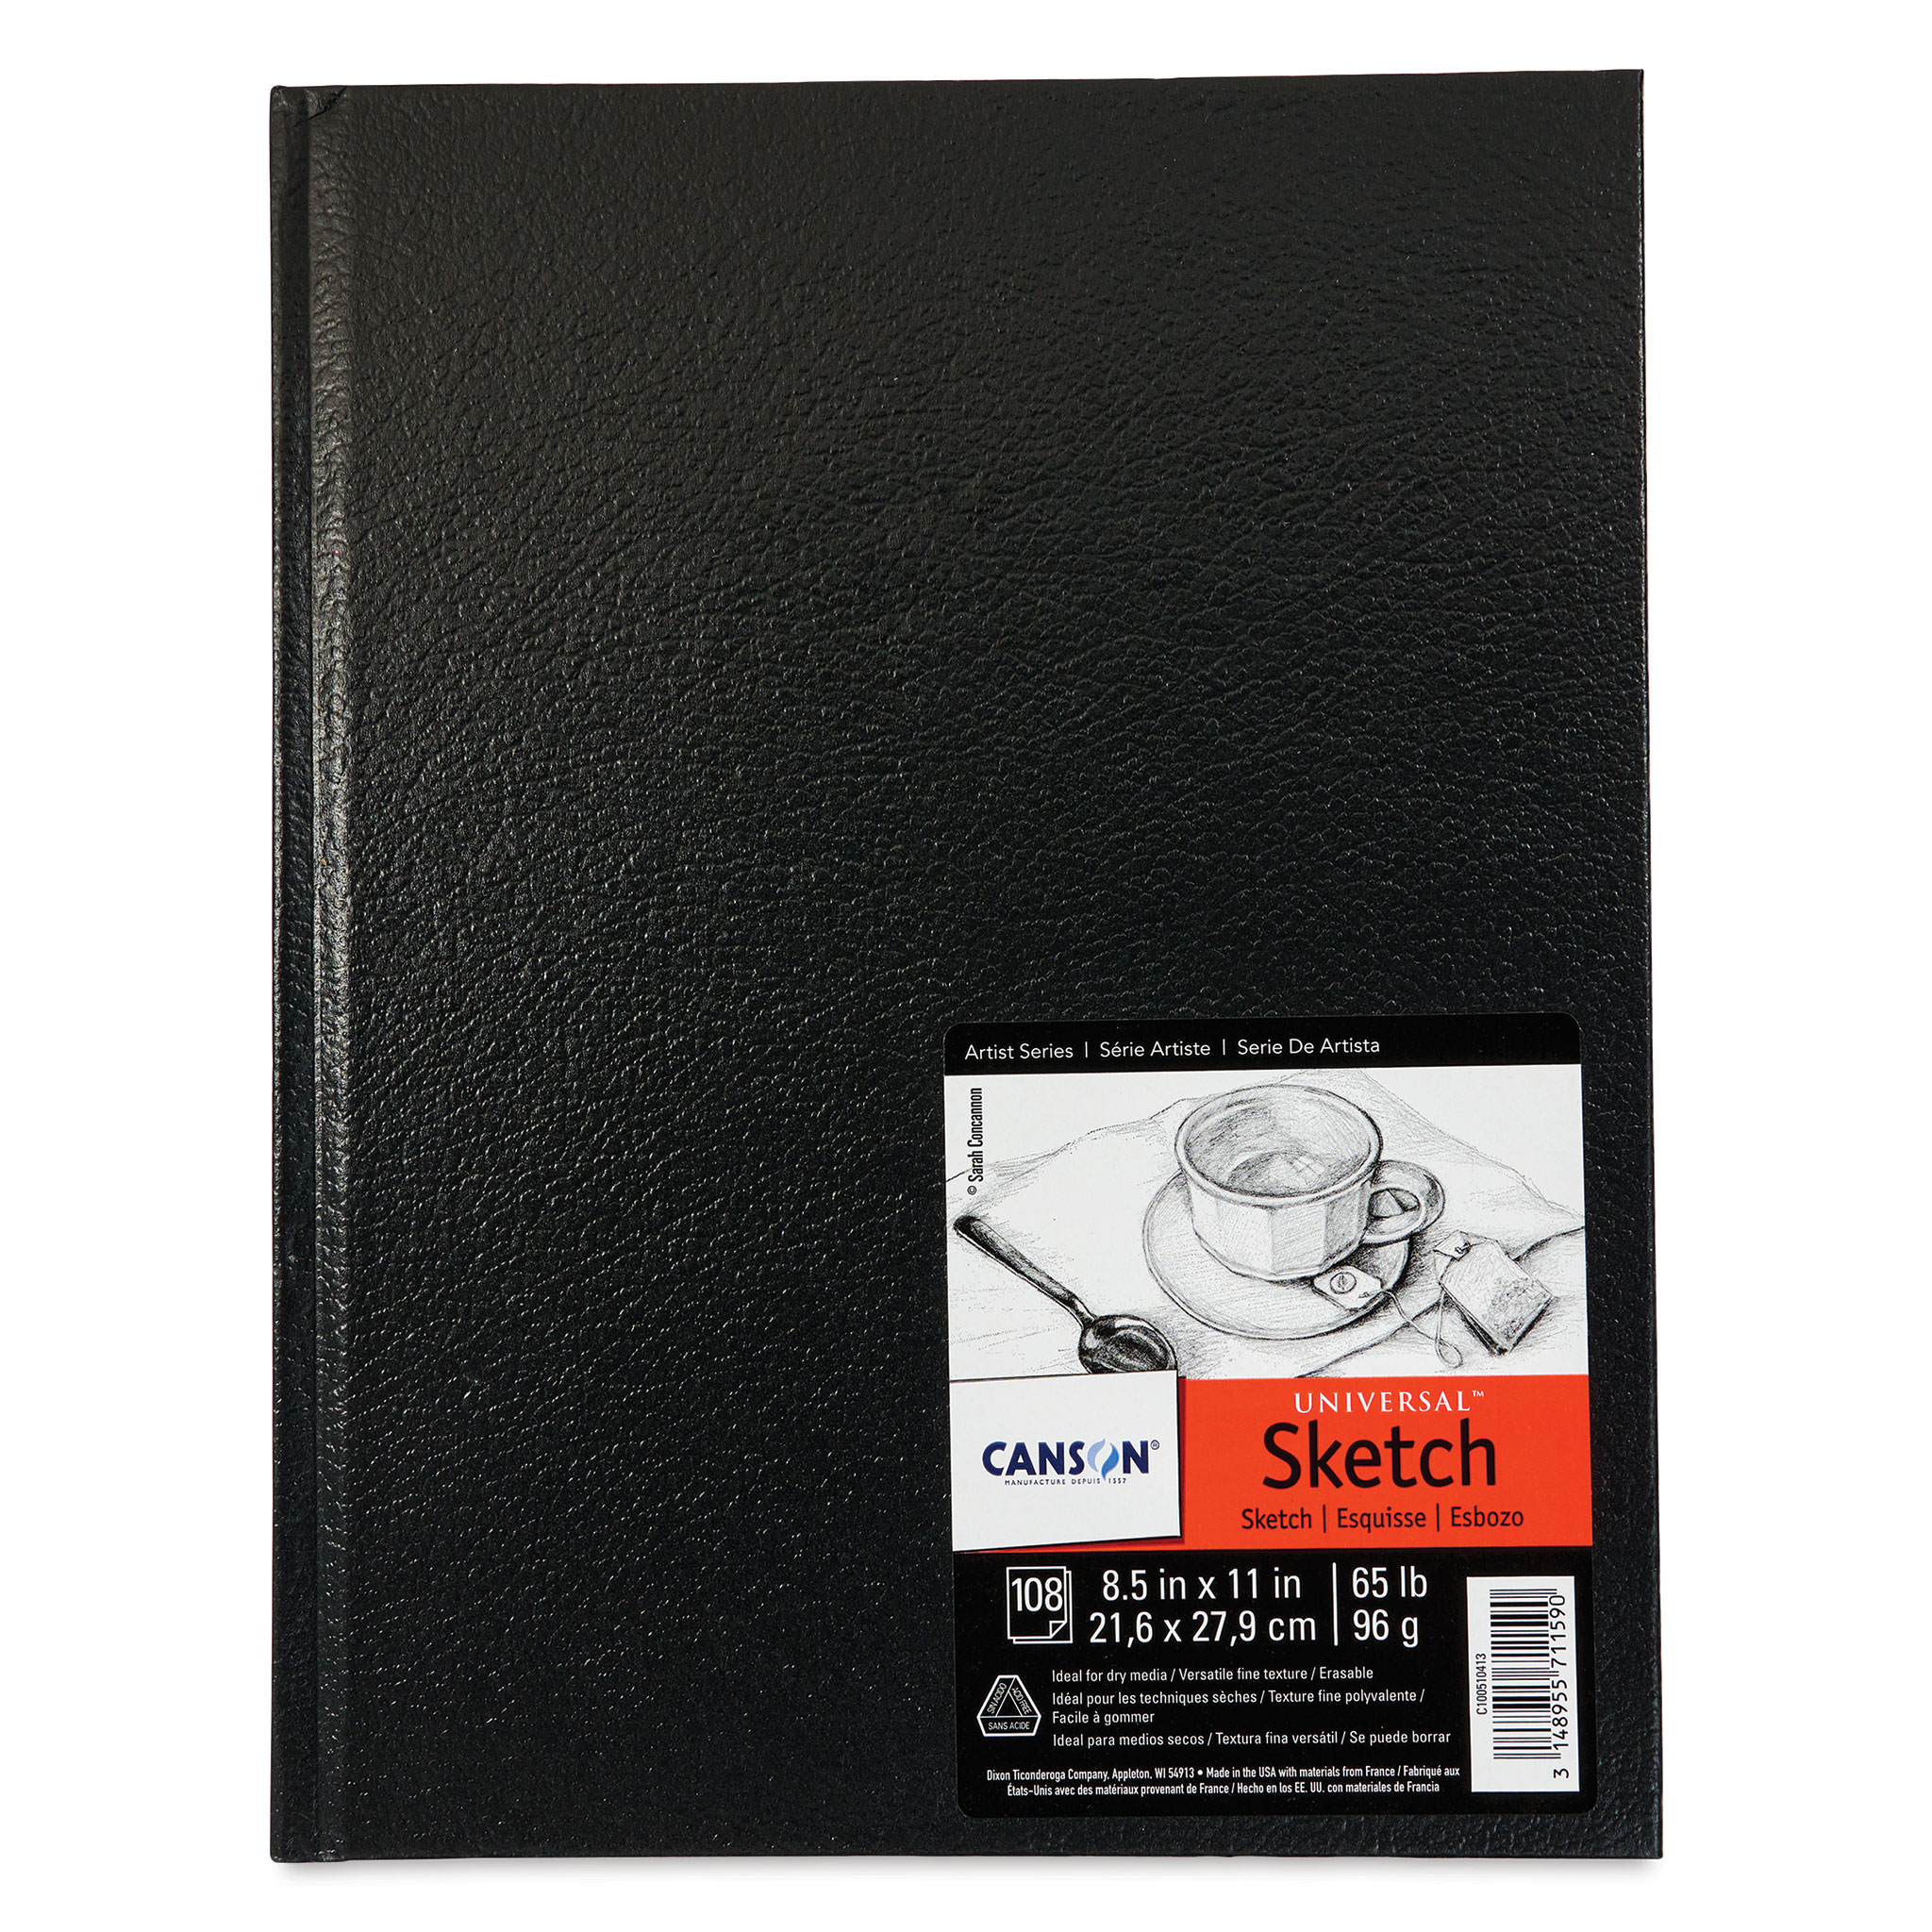 Strathmore 400 Series Sketch Paper Pad, Side Wire Bound, 18x24 inches, 30  Sheets (60lb/89g) - Artist Sketchbook for Adults and Students - Graphite